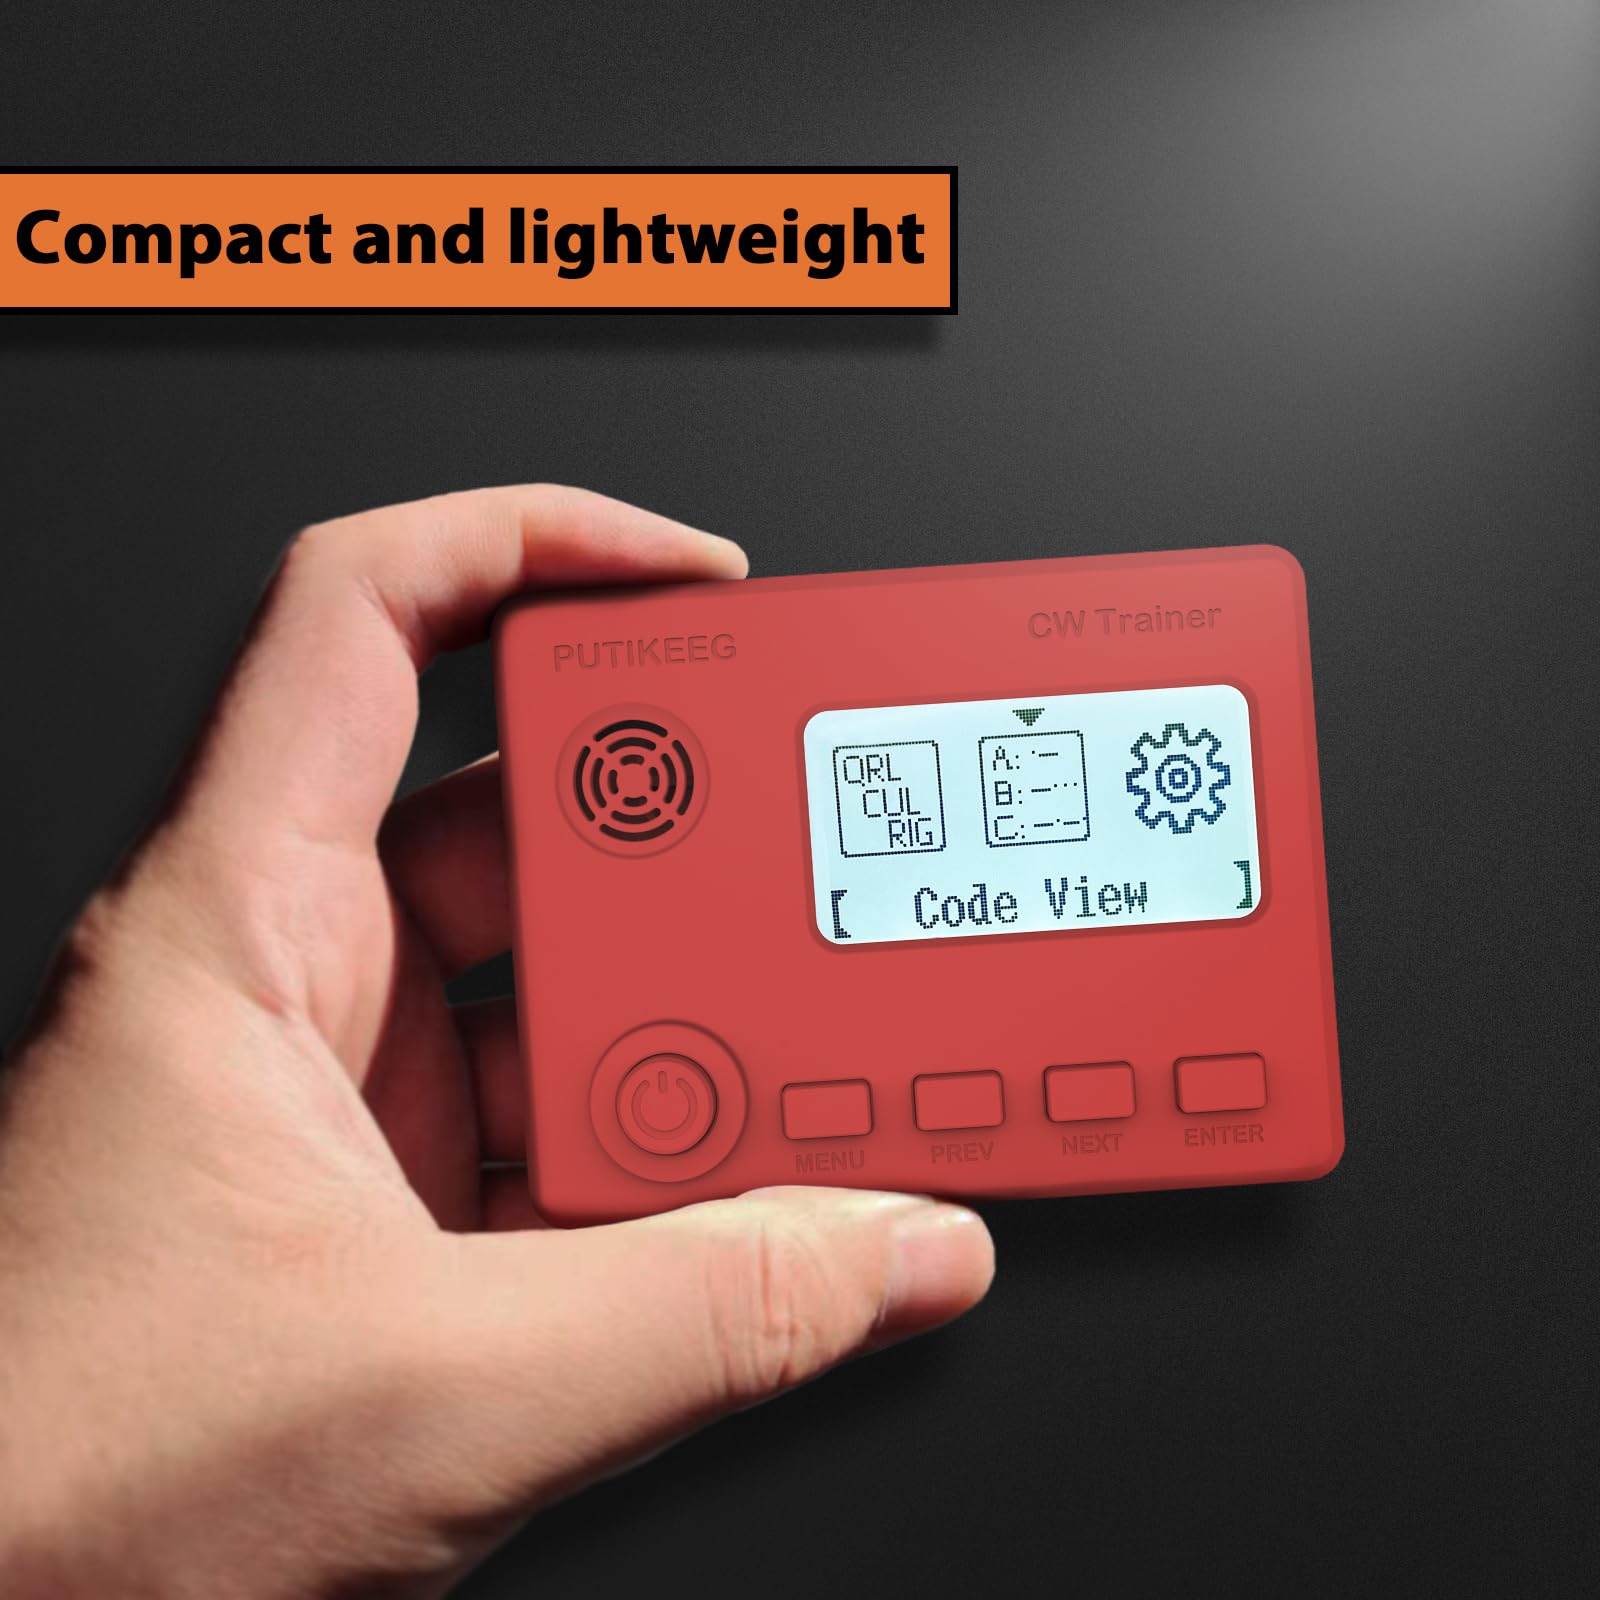 This red mini CW trainer with display has a built-in translation function that converts Morse code to text in real time, simplifying the learning process. Offers a variety of practice modes from basic to advanced to meet different stages of learning needs. Made of high quality materials to ensure durability and reliability. Equipped with an adjustable sound switch that allows you to turn the sound on or off as needed, making it easy to use in different environments. 